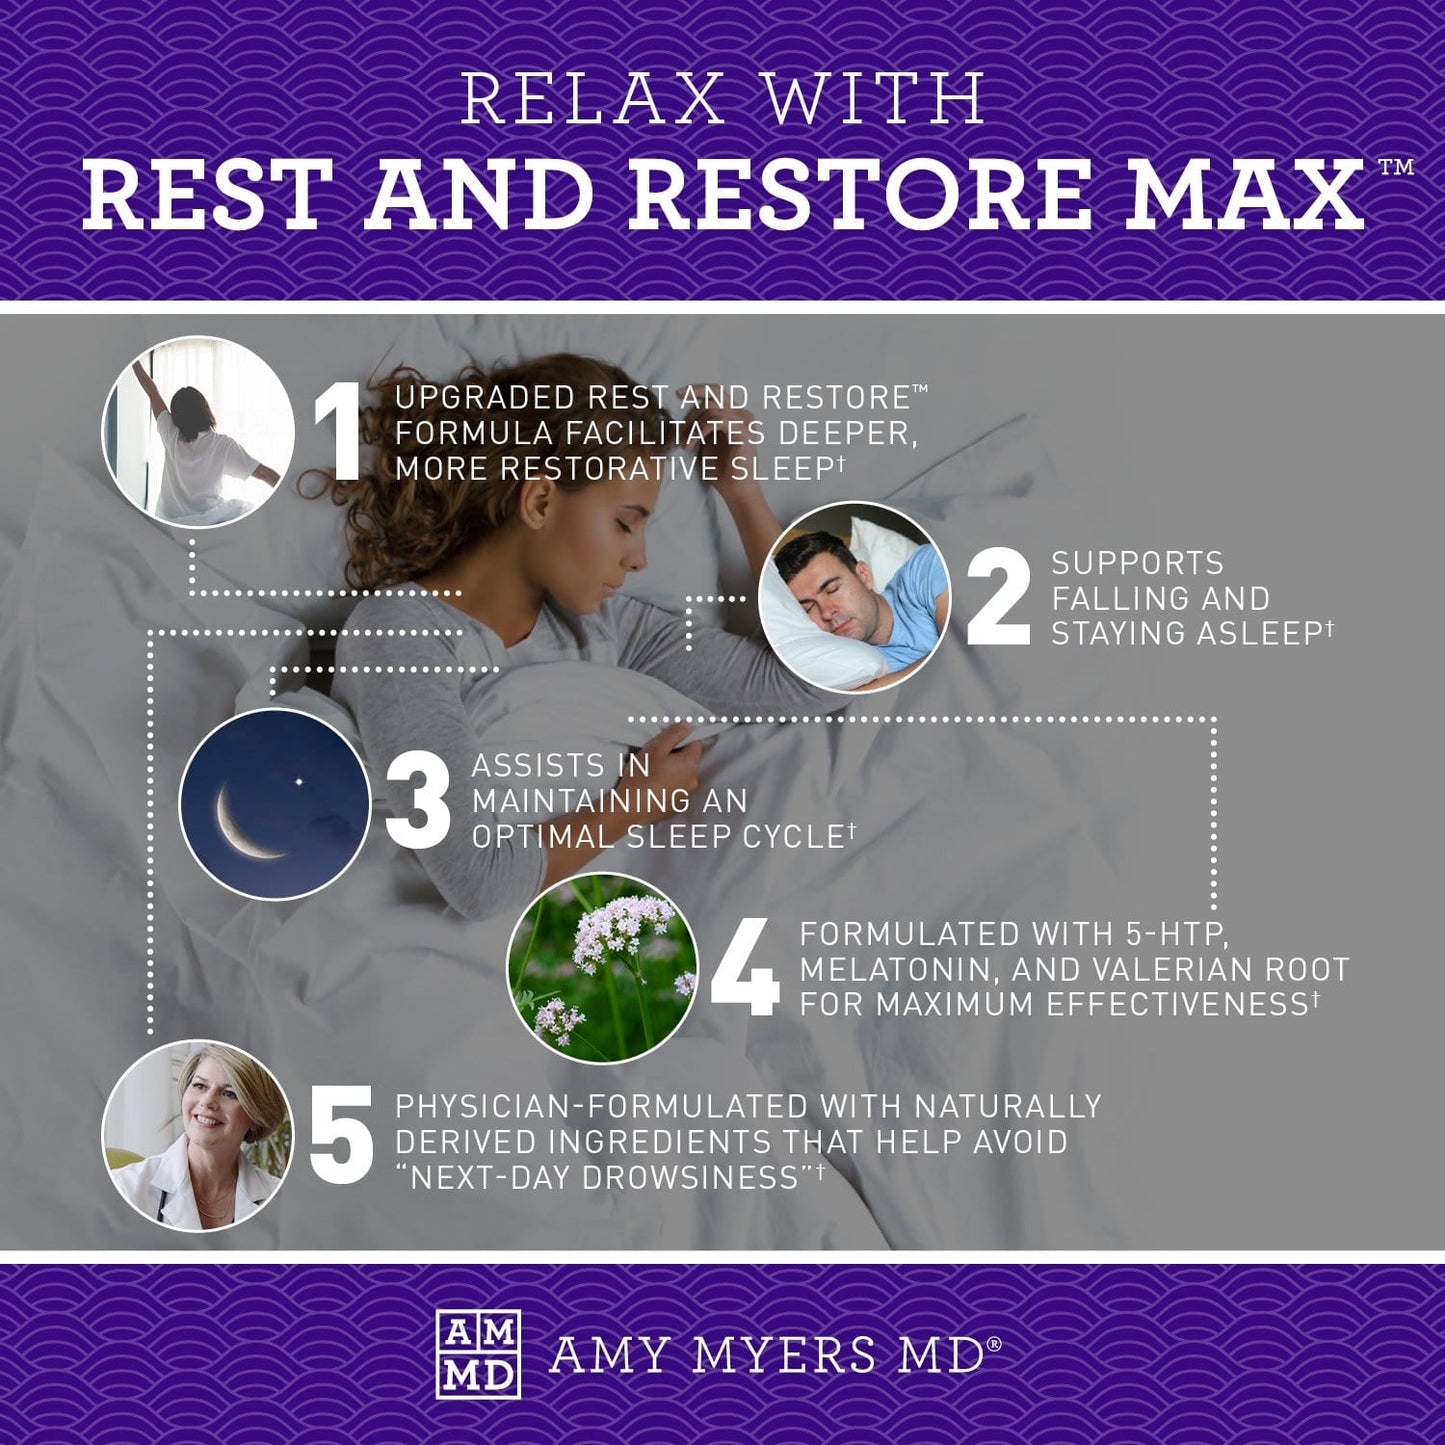 Rest and Restore Max™ by Amy Myers MD